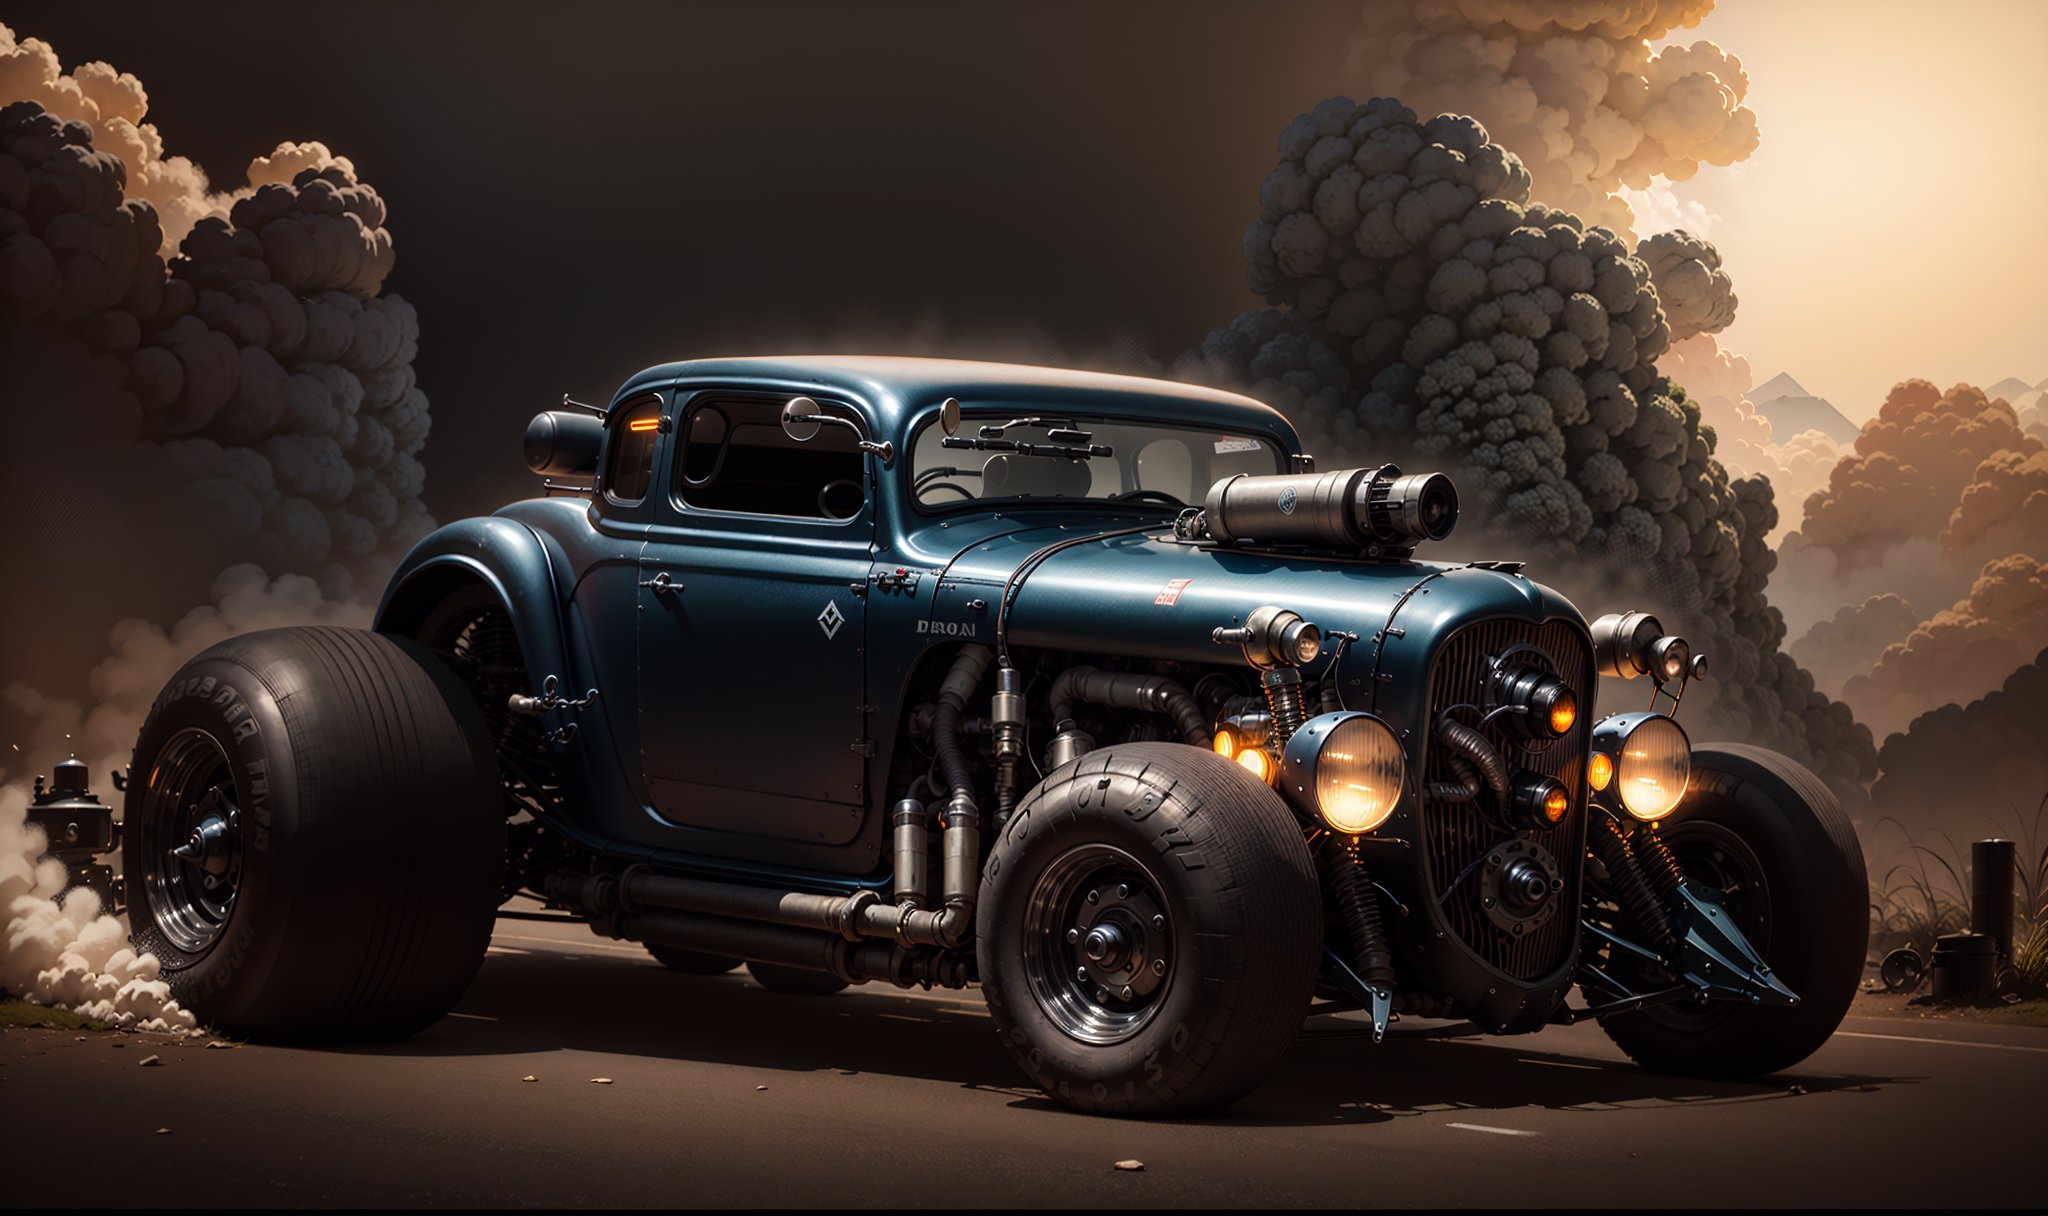 1932s retro futuristic dieselpunk armored Black Hot Rod car racing down a country road